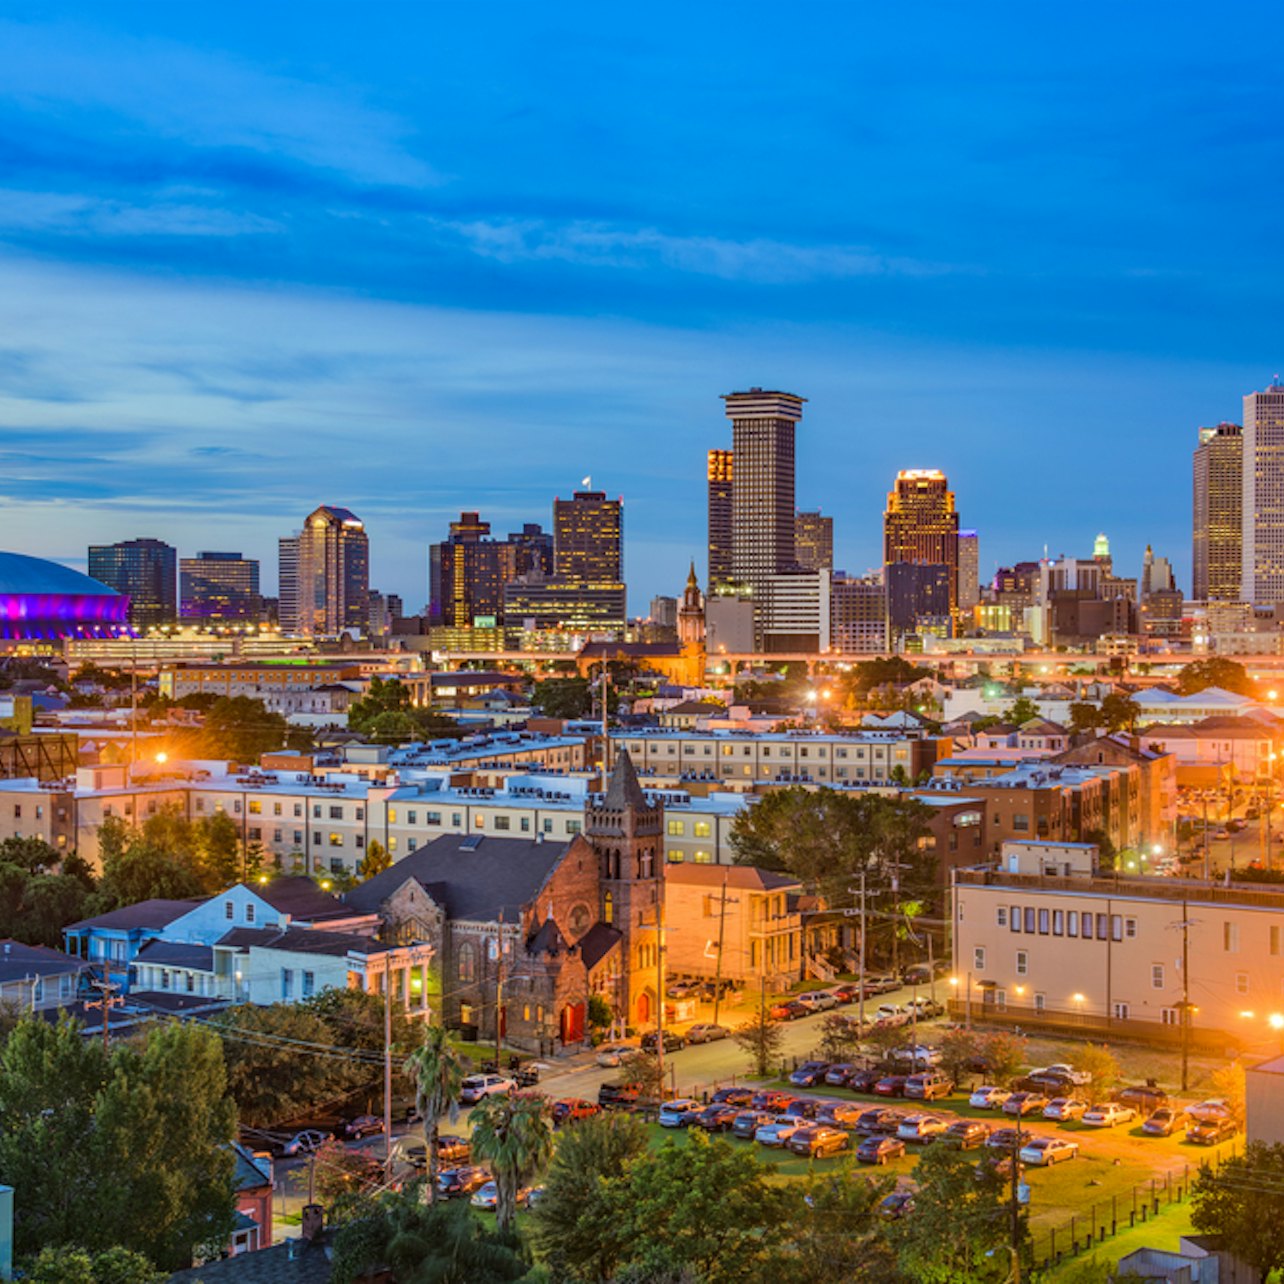 Go City New Orleans: All Inclusive Pass - Accommodations in New Orleans